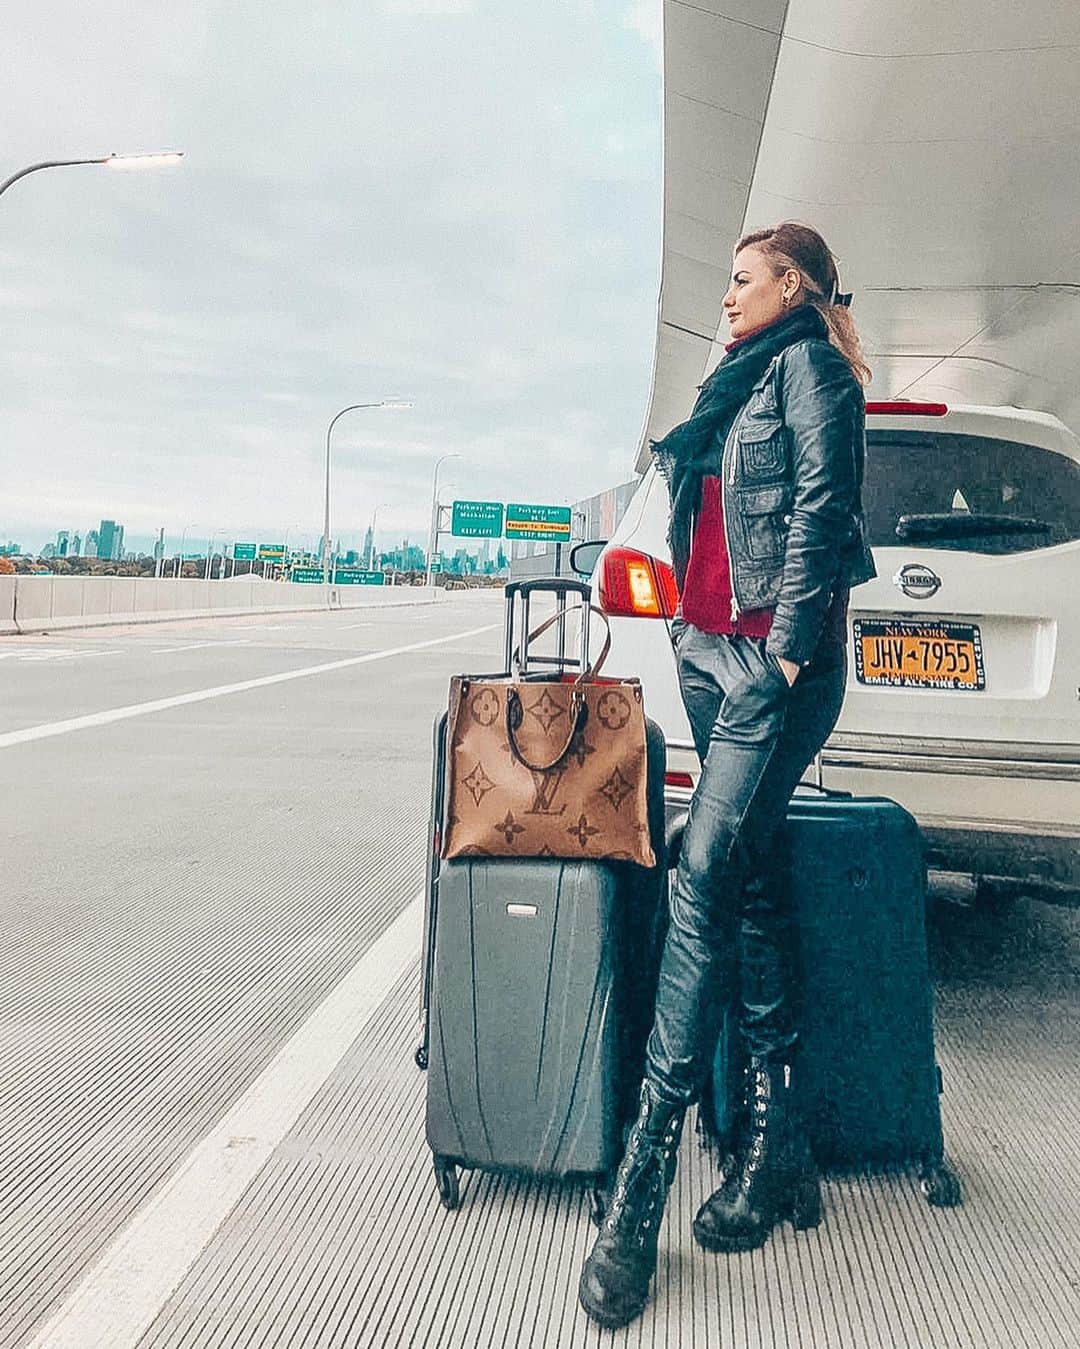 Anna Starodubtsevaさんのインスタグラム写真 - (Anna StarodubtsevaInstagram)「Bye Bye New York. I’ll be visiting,I promise 🙏❤️. ⠀ I’m so very excited to start new chapter of my life and I have a strong feeling like never before that I’m moving to the best possible place considering personal and professional goals I have in mind. ⠀ New York gave me sooo so much! So much fun,so many opportunities,so much struggles,so many amazing friends and experiences. It was hell of a roller coaster for 14 years.The best and the worst times of my life. I squeezed everything from this place. I don’t feel sad or scared about leaving NY at all,I’m very very excited about my new journey. I remember few years back I spent entire summer in Bali.I didn’t have intention to stay for 4 months at first,but the island just didn’t let me go and I was changing my return ticket for 3 times!!!Last one was with open date 🤪. ⠀ One morning I woke with strong feeling “I’m done” ,time to go home. And I flew back home few days later. My home was New York at that time. ⠀ I have exactly the same feeling now. I’m done. It’s time to go home...and home is where your heart is ❤️. ⠀ P.S. my business is still in NY. There are some changes and new people coming in,but I’m not leaving this child for a while.And Im also planning to open up another one in Dallas.So stay tuned my friends.Lots of exciting news are coming up as soon as I settle in and get some rest from this very stressful move ❤️. ⠀I’d like to say thank you to all amazing people who took their time to send me nice messages with warm wishes.I really appreciate every single one of them ❤️,your support means the world to me 🙏. ⠀🇷🇺🇷🇺🇷🇺. В общем поехала я 😀🙌. Сегодня почему-то захотелось выразить все мысли на английском,я думаю что буду чаще разбавлять свою русскоязычную ленту.Переводите текст, практикуйтесь,друзья😘. Хочу лишь сказать огромное спасибо за ваши сообщения которыми завален мой Директ. От души,дорогие мои благодарю вас за напутствия и поддержку,это так много для меня значит 🙏. Немного отдохну после переезда,освоюсь на новом месте и обязательно расскажу вам о своих планах на будущее,а их как вы понимаете очень много,у меня по-другому быть не может 😊🙌. Спасибо моя дорогая @elena___efimova  за тёплые」11月2日 4時50分 - anyastar